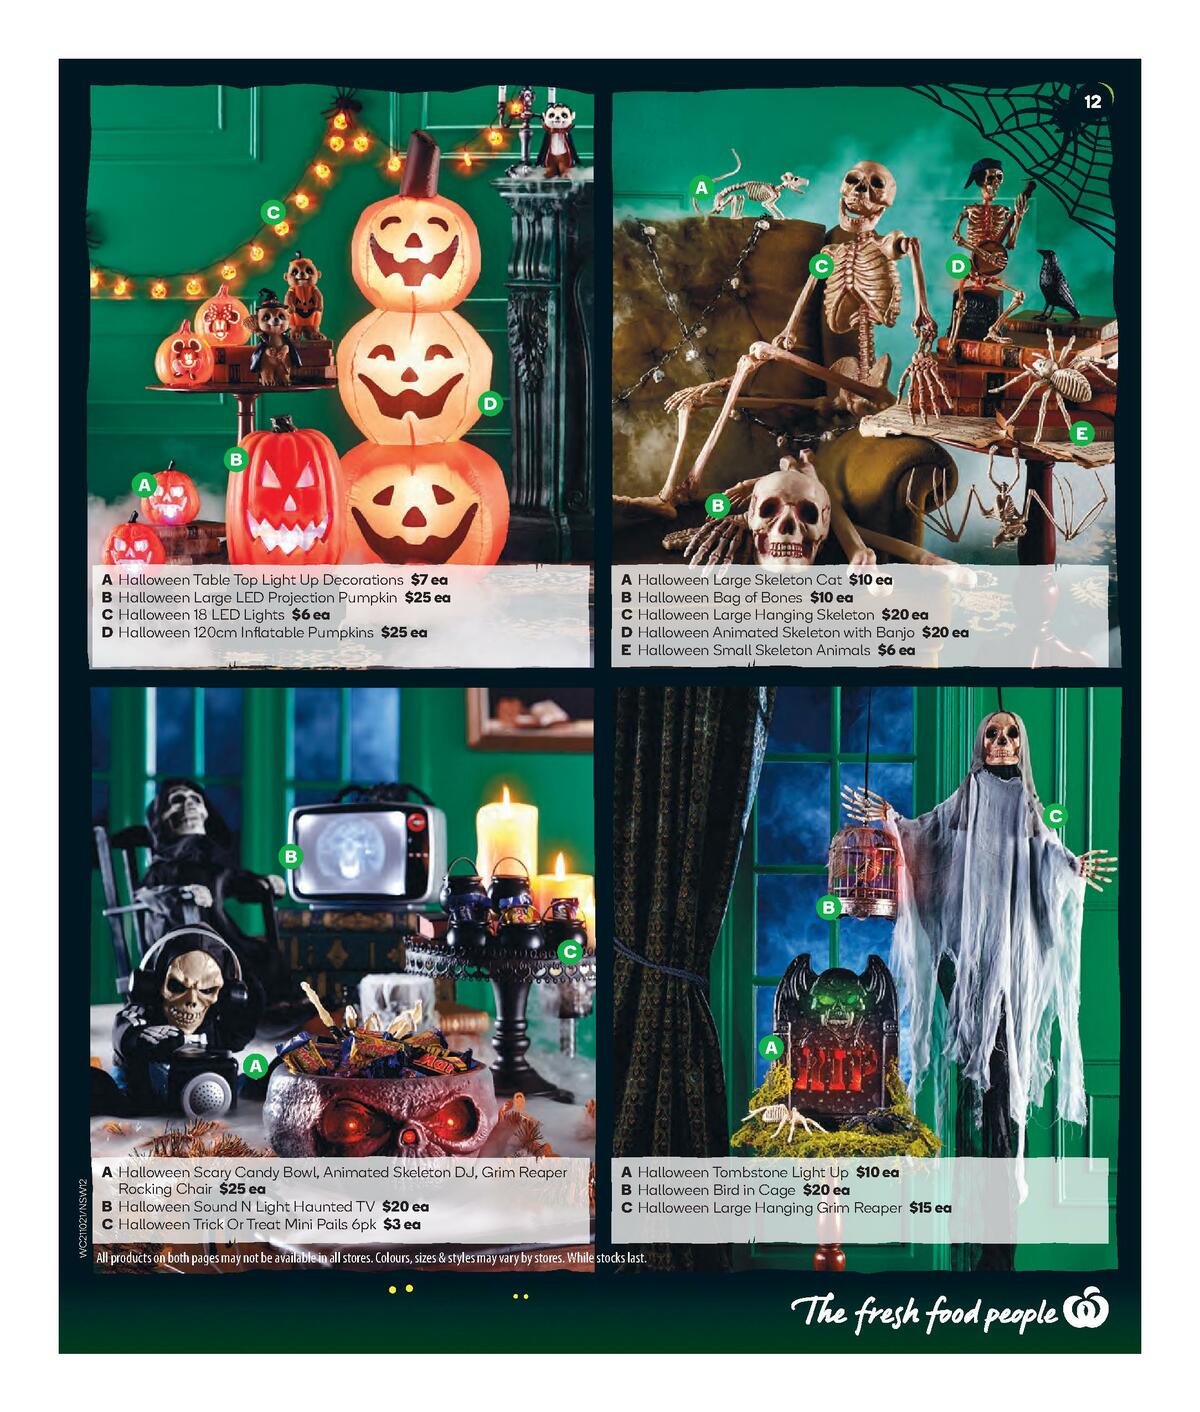 Woolworths Happy Halloween Catalogues from 21 October